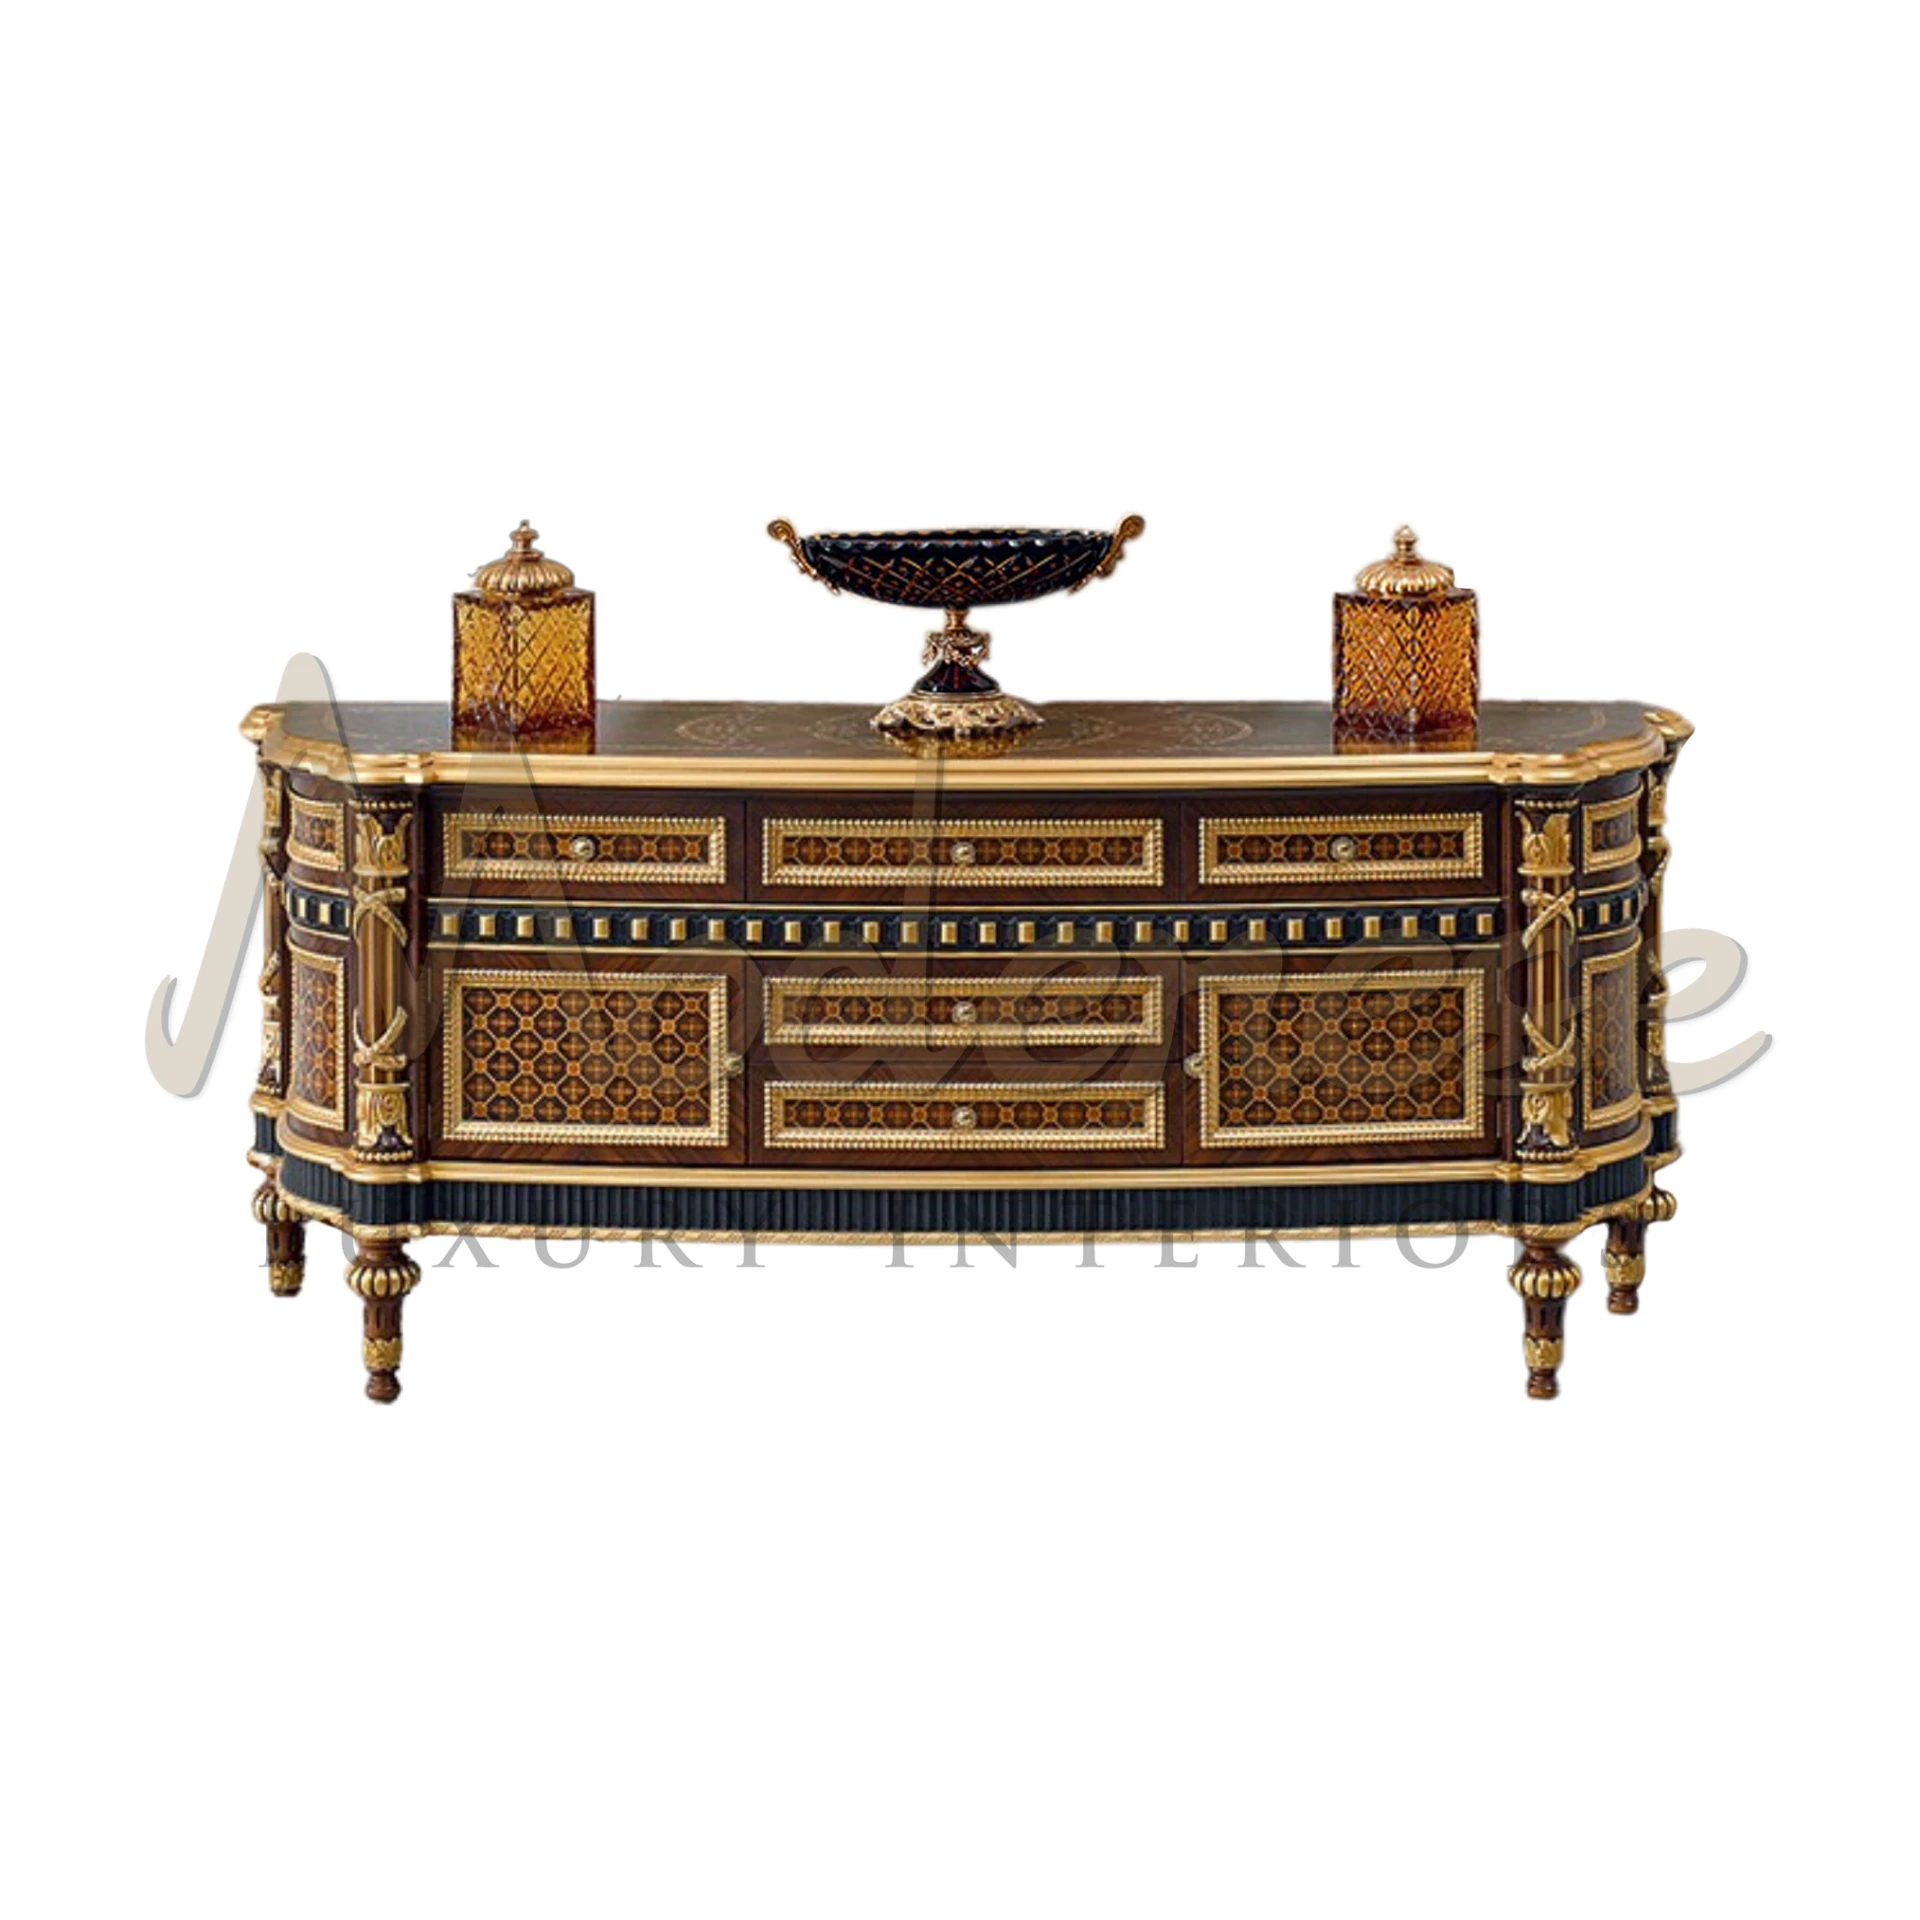 Luxury New Baroque Design TV Stand, with handcrafted engravings and finishes, embodying Italian design elegance.